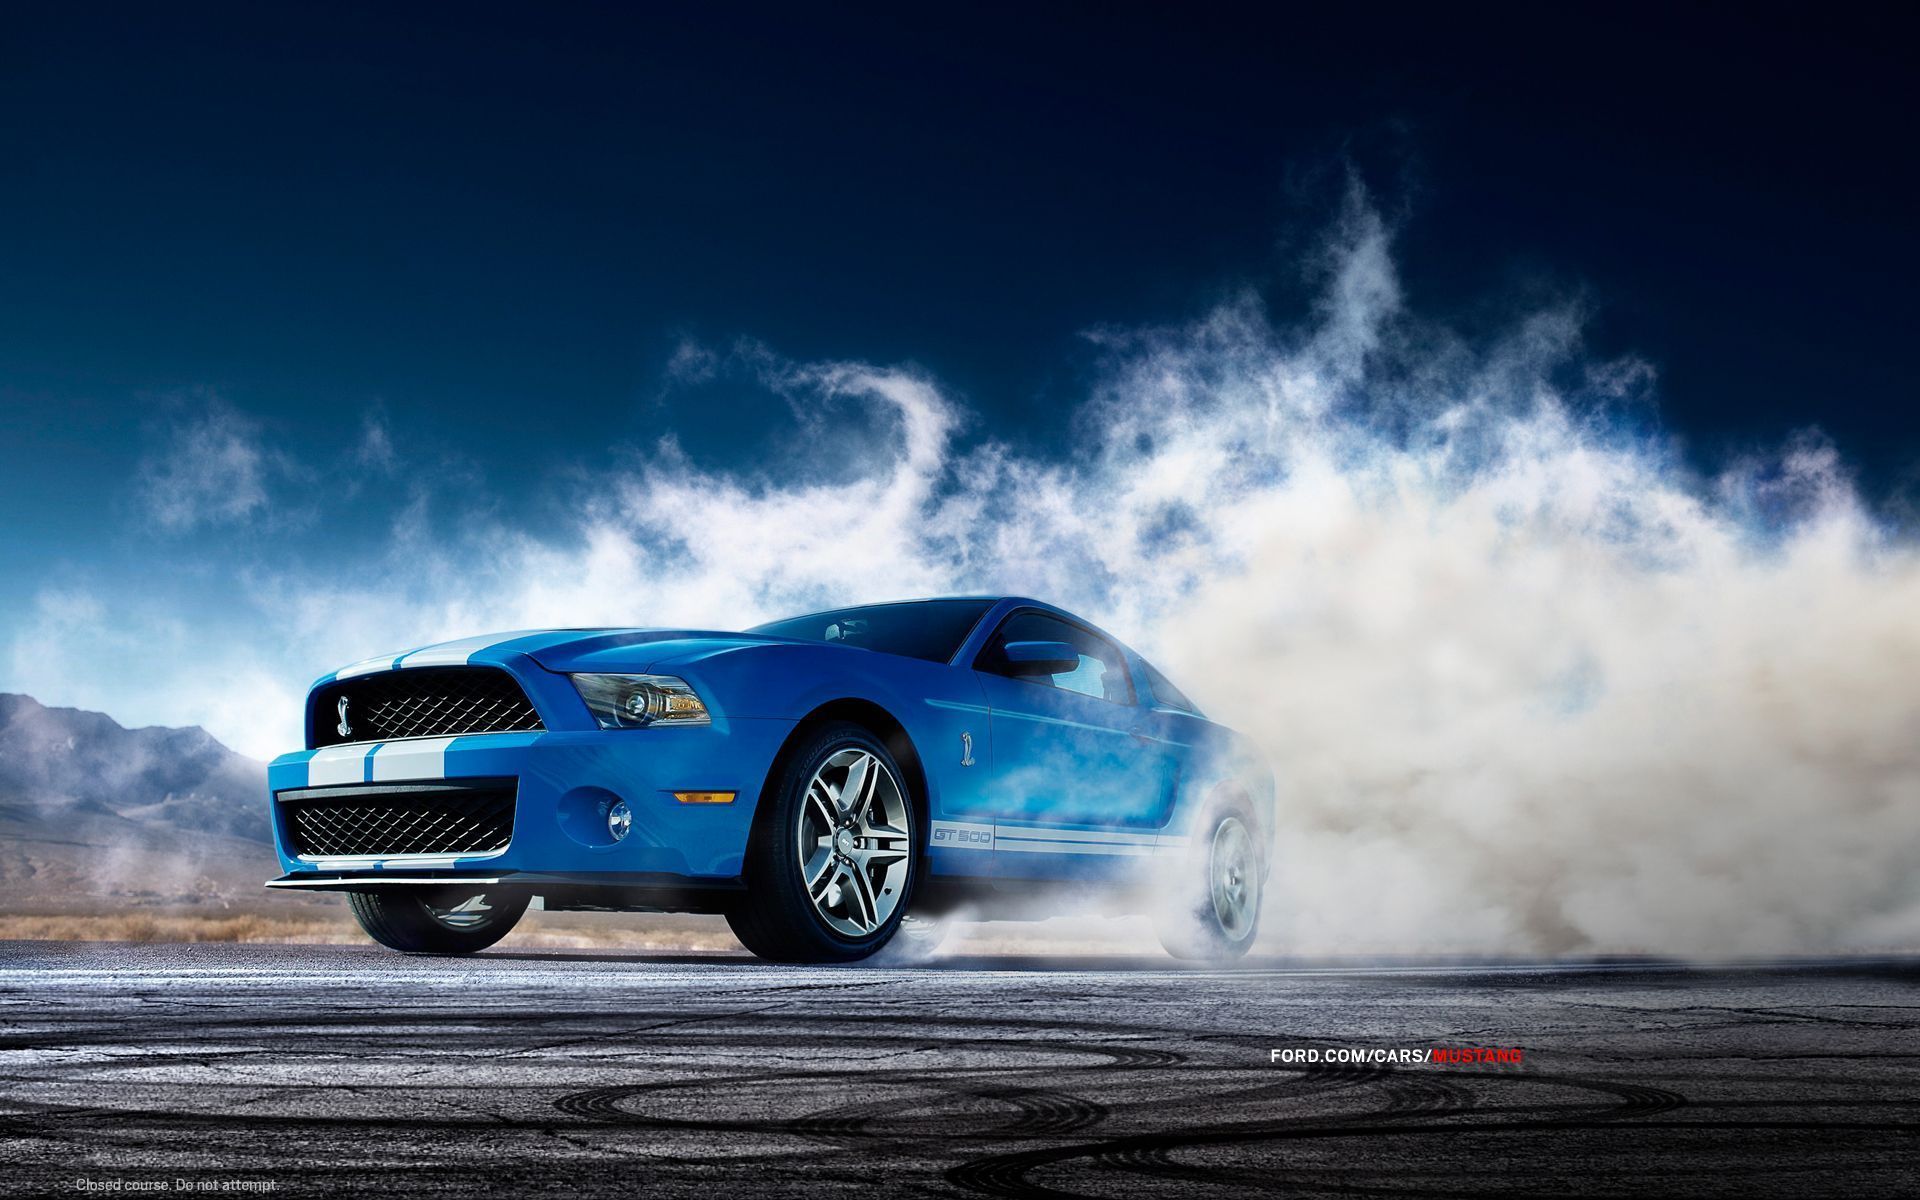 Awesome Ford Mustang Shelby Wallpaper Full HD Pictures